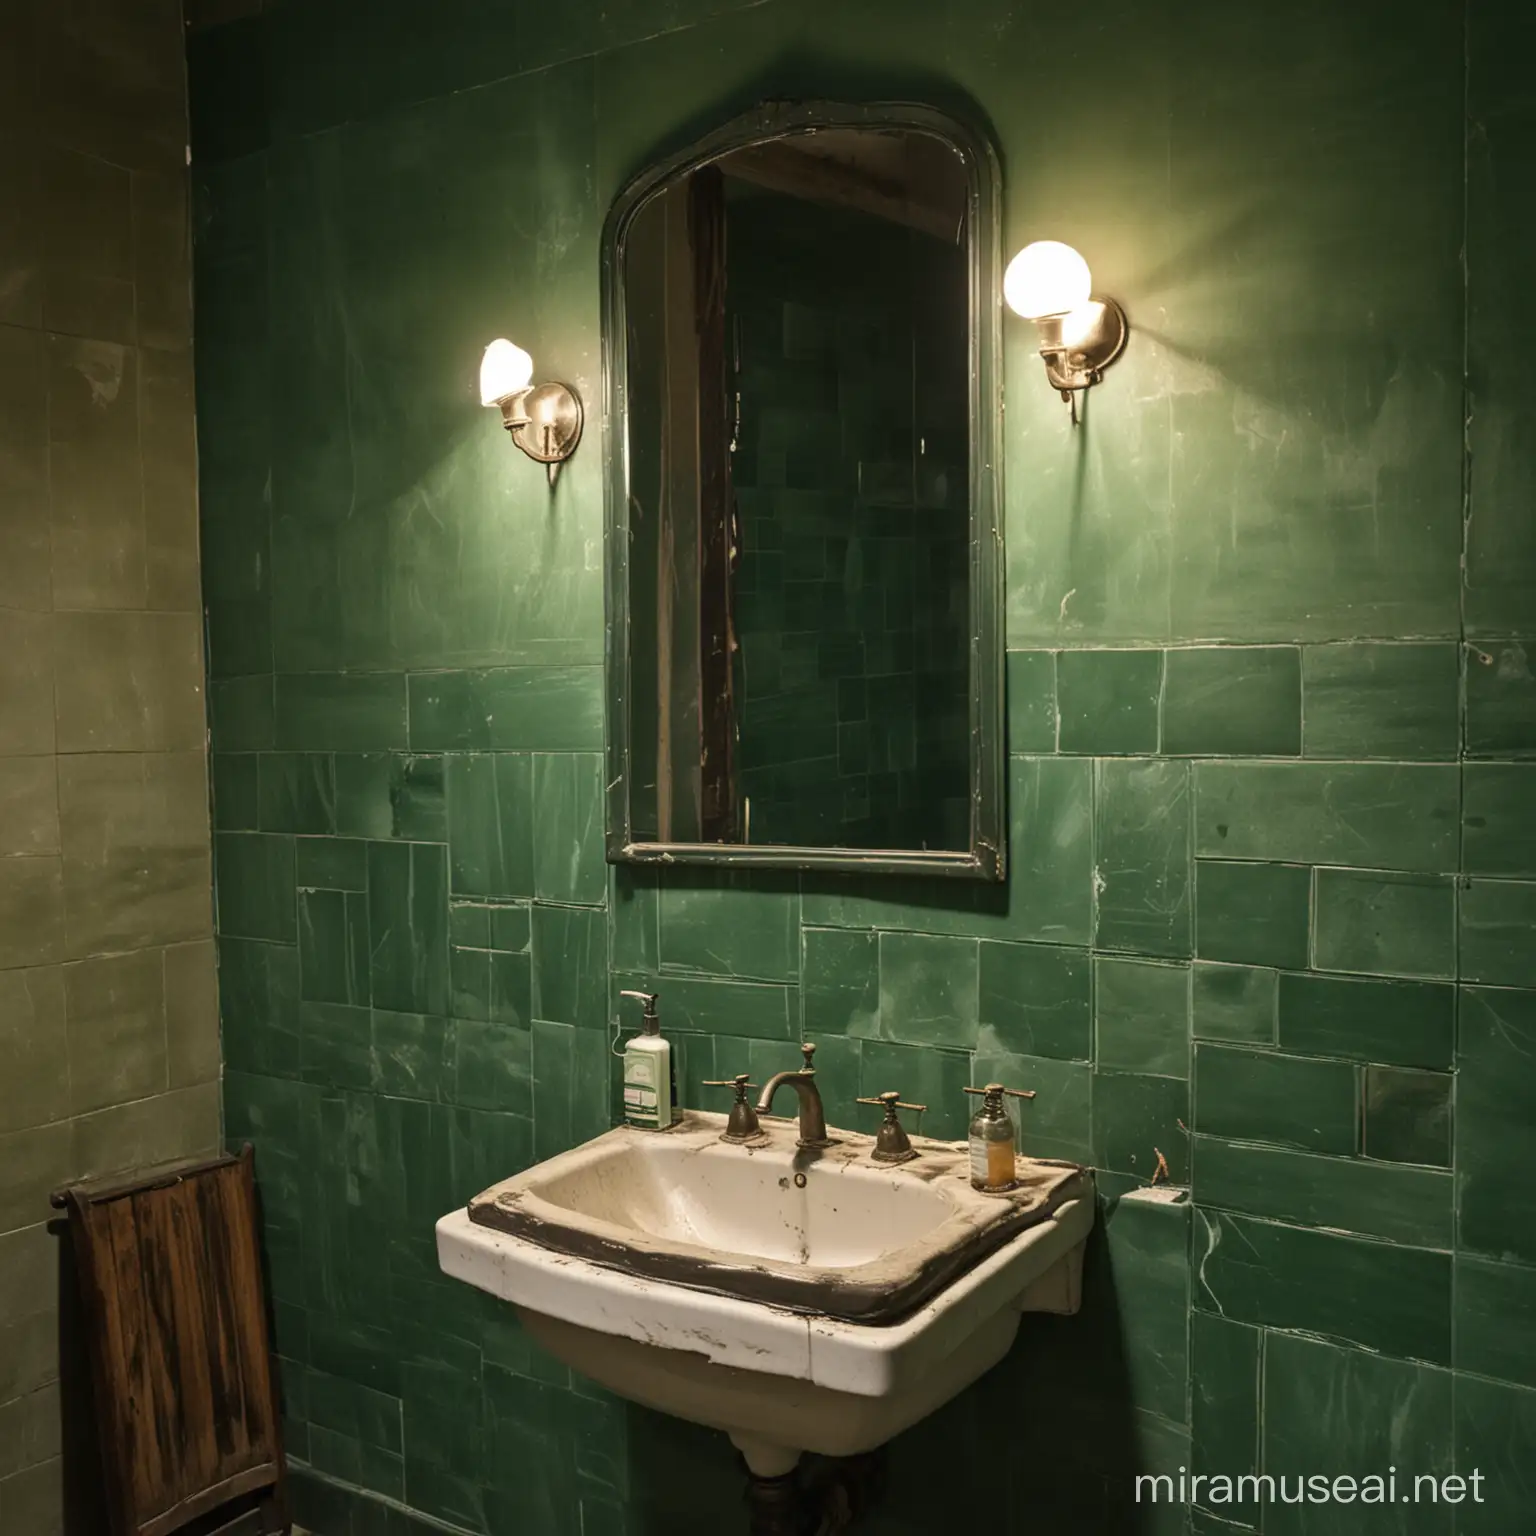 Vintage Bathroom Interior with Mirror and Washbasin in Green Light